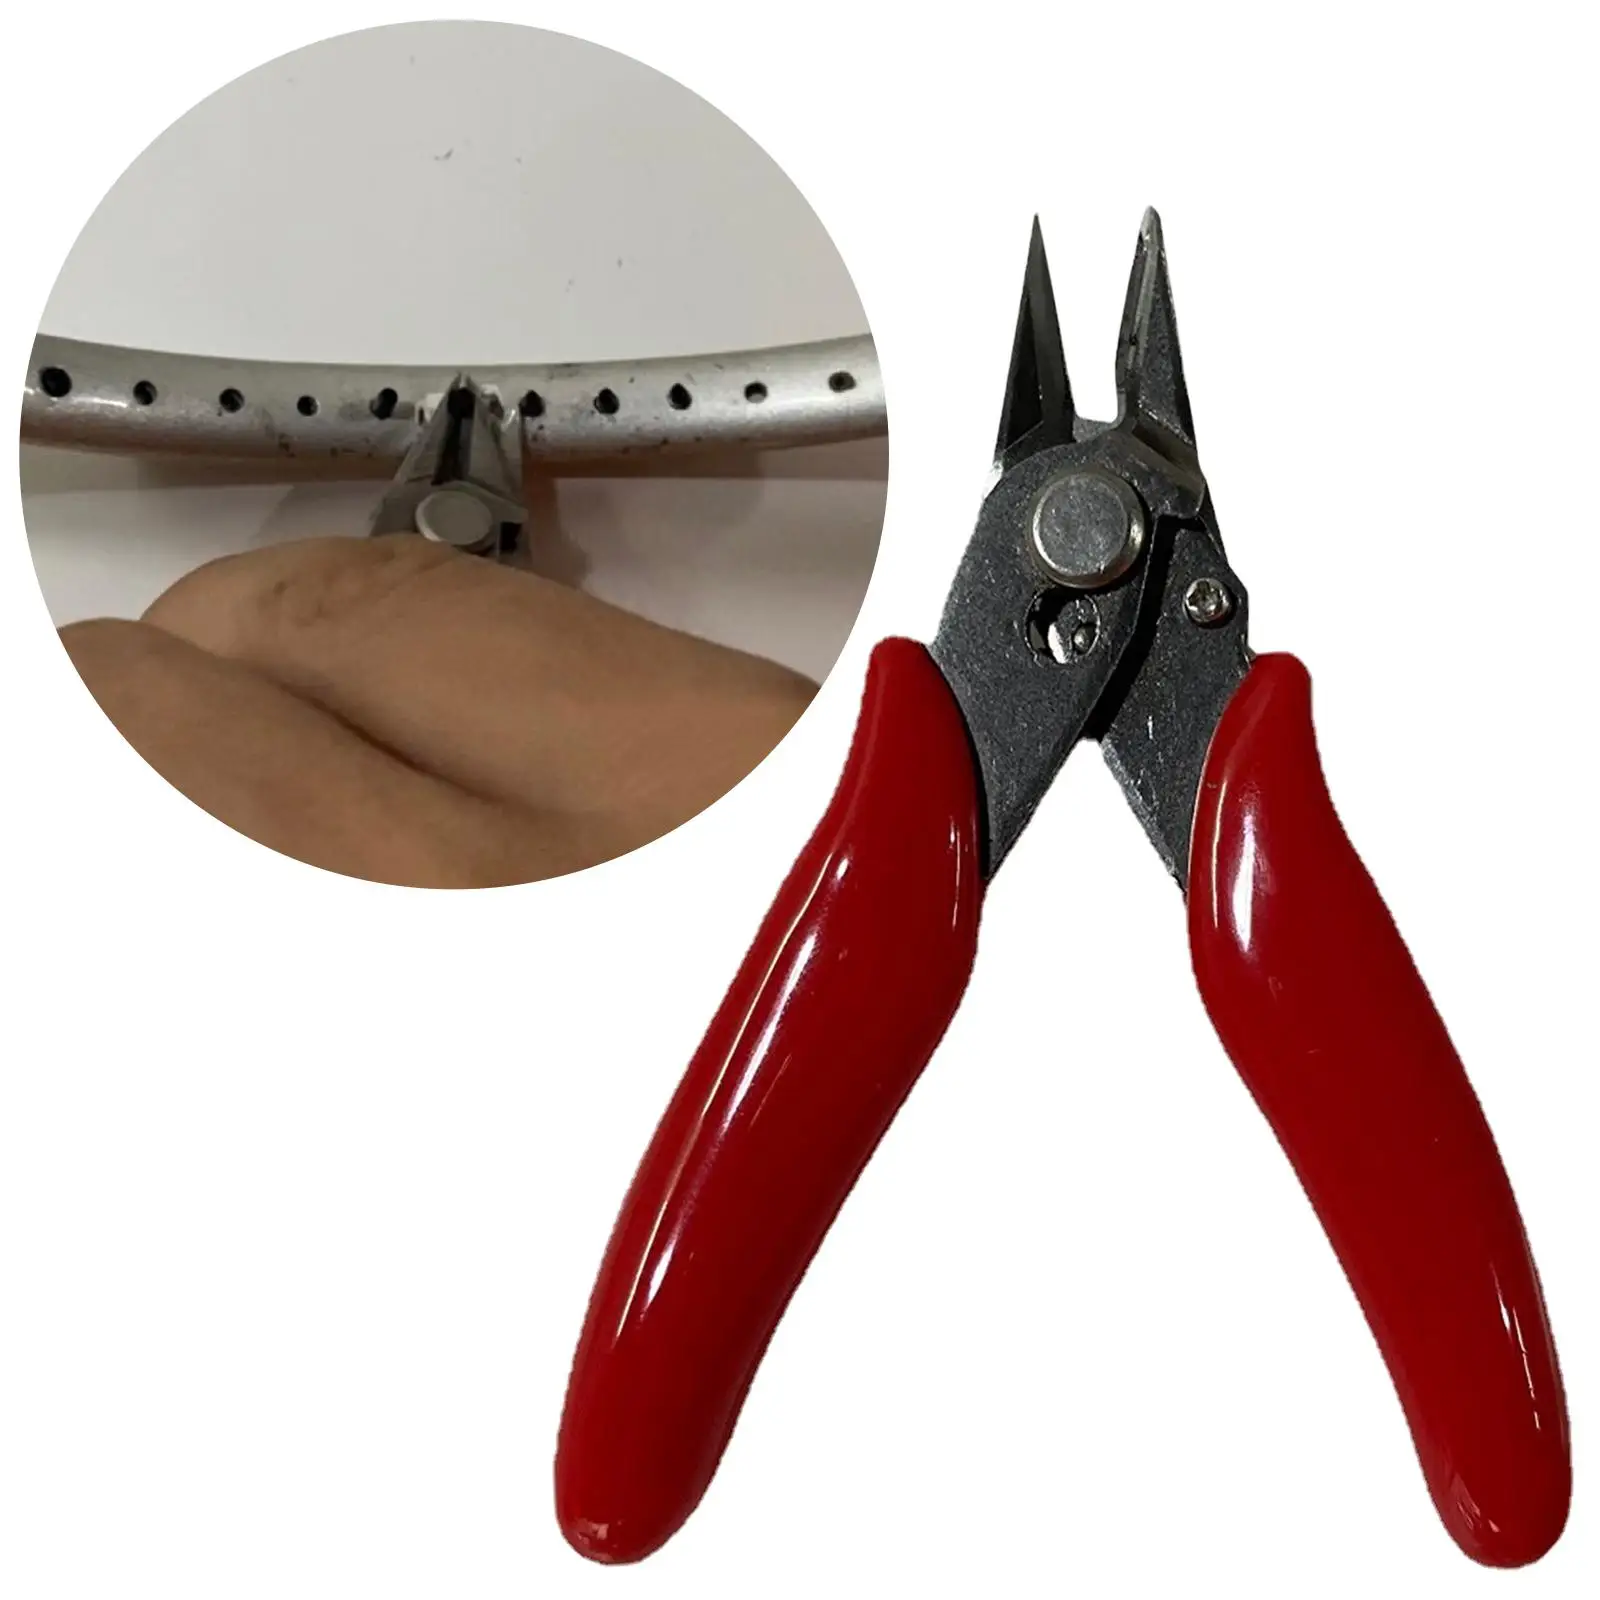 Trimming Pliers Cutter Diagonal Pliers for Badminton Narrow Space Cutting